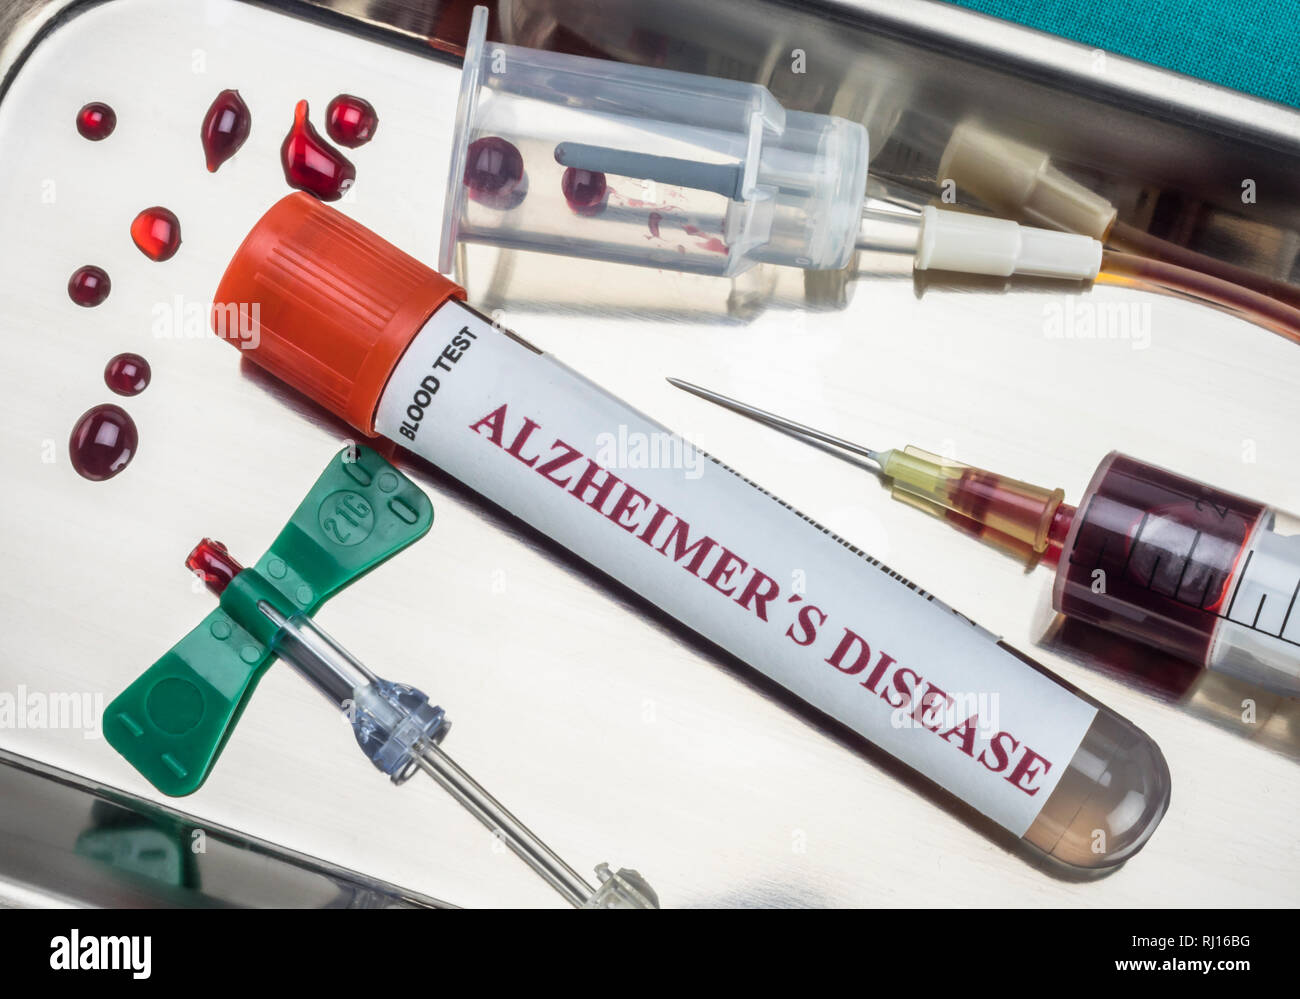 blood sample to investigate remedy against Alzheimer's disease, conceptual image Stock Photo